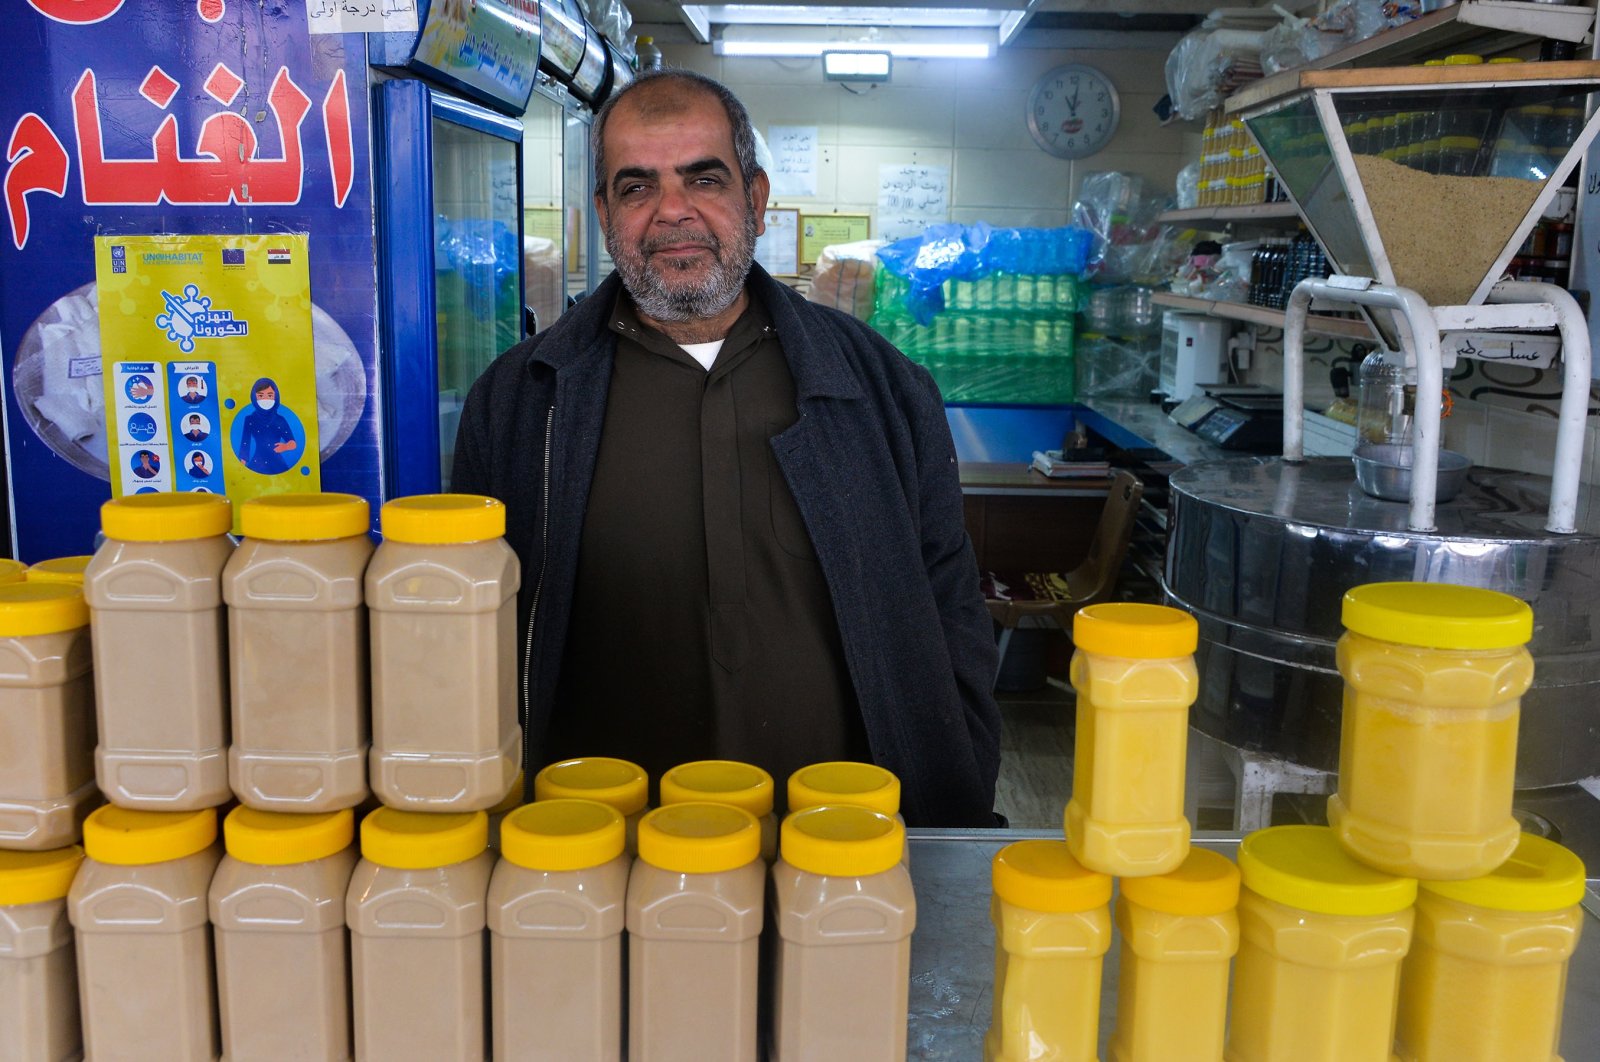 An Iraqi salesman poses for a picture in a shop at the Al-Bursa wholesale market in the northern city of Mosul, Iraq, Nov. 28, 2020. (Photo by Zaid AL-OBEIDI / AFP)